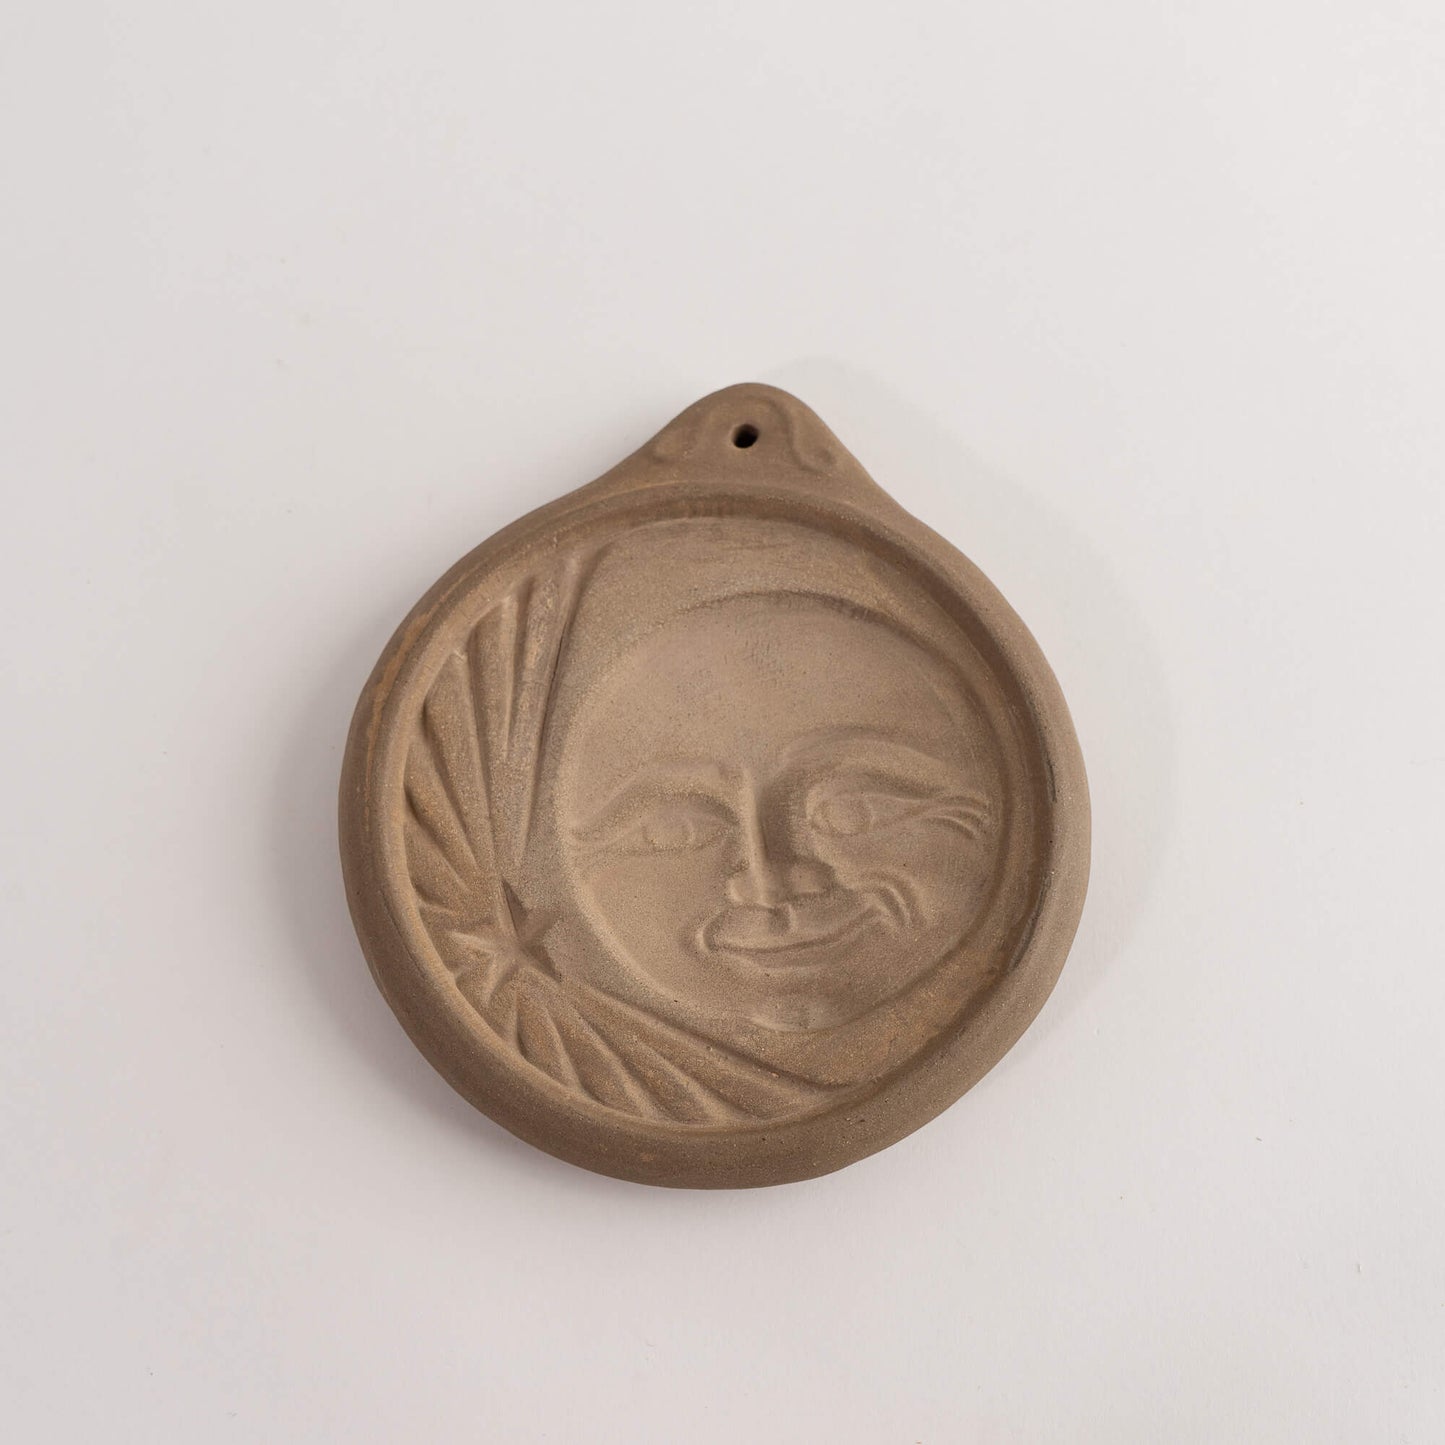 Load image into Gallery viewer, Vintage Hartstone Celestial Cookie Mold Full moon face and star
